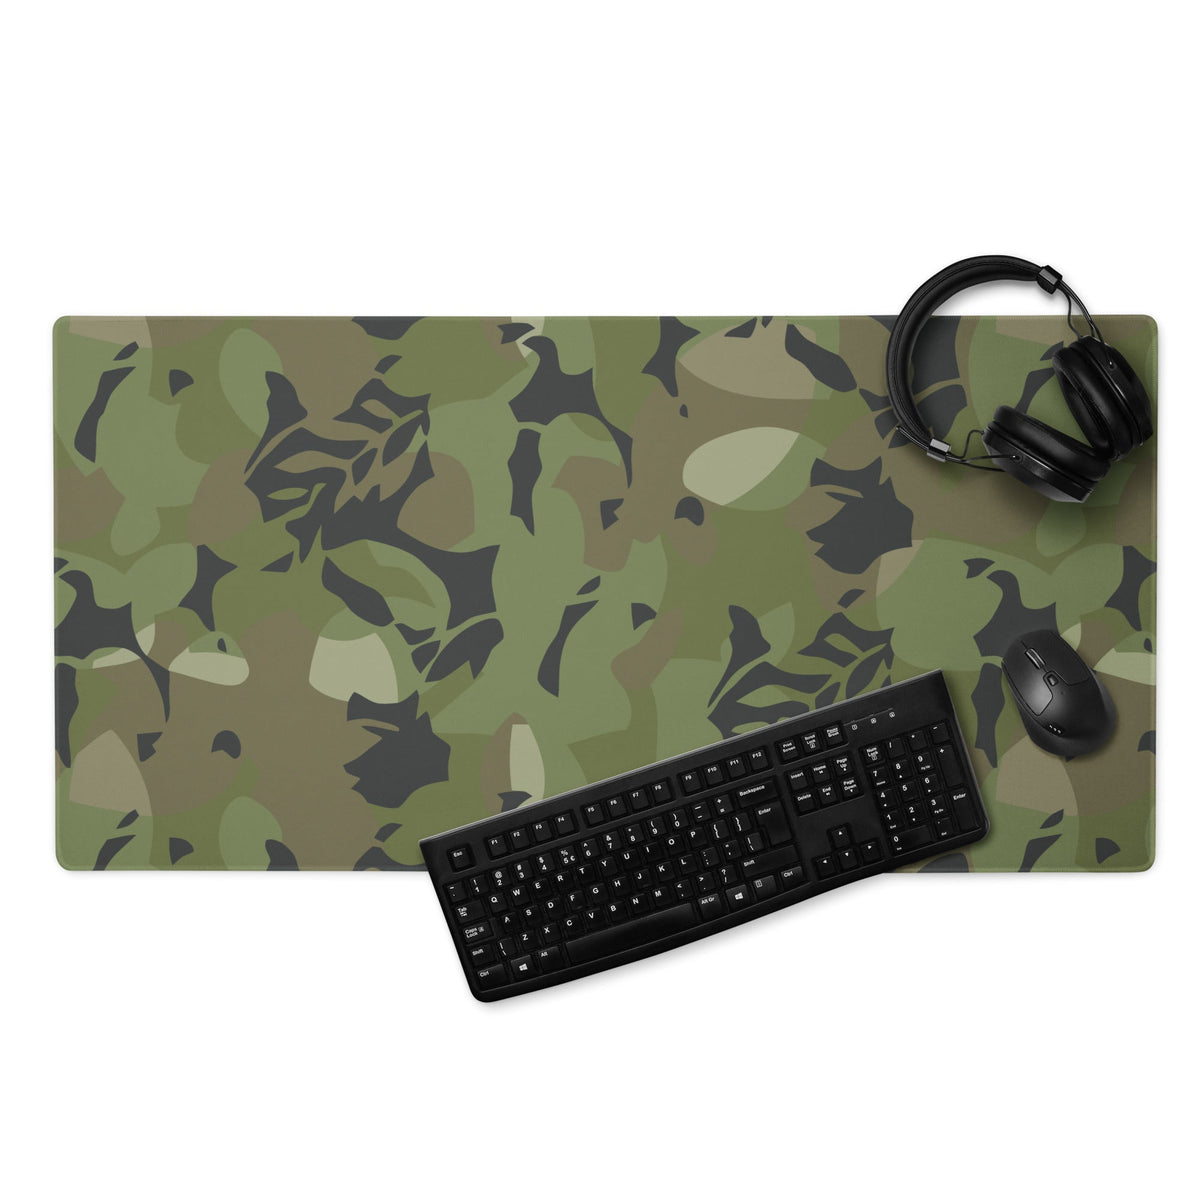 Cuban Special Troops Elm Leaf CAMO Gaming mouse pad - 36″×18″